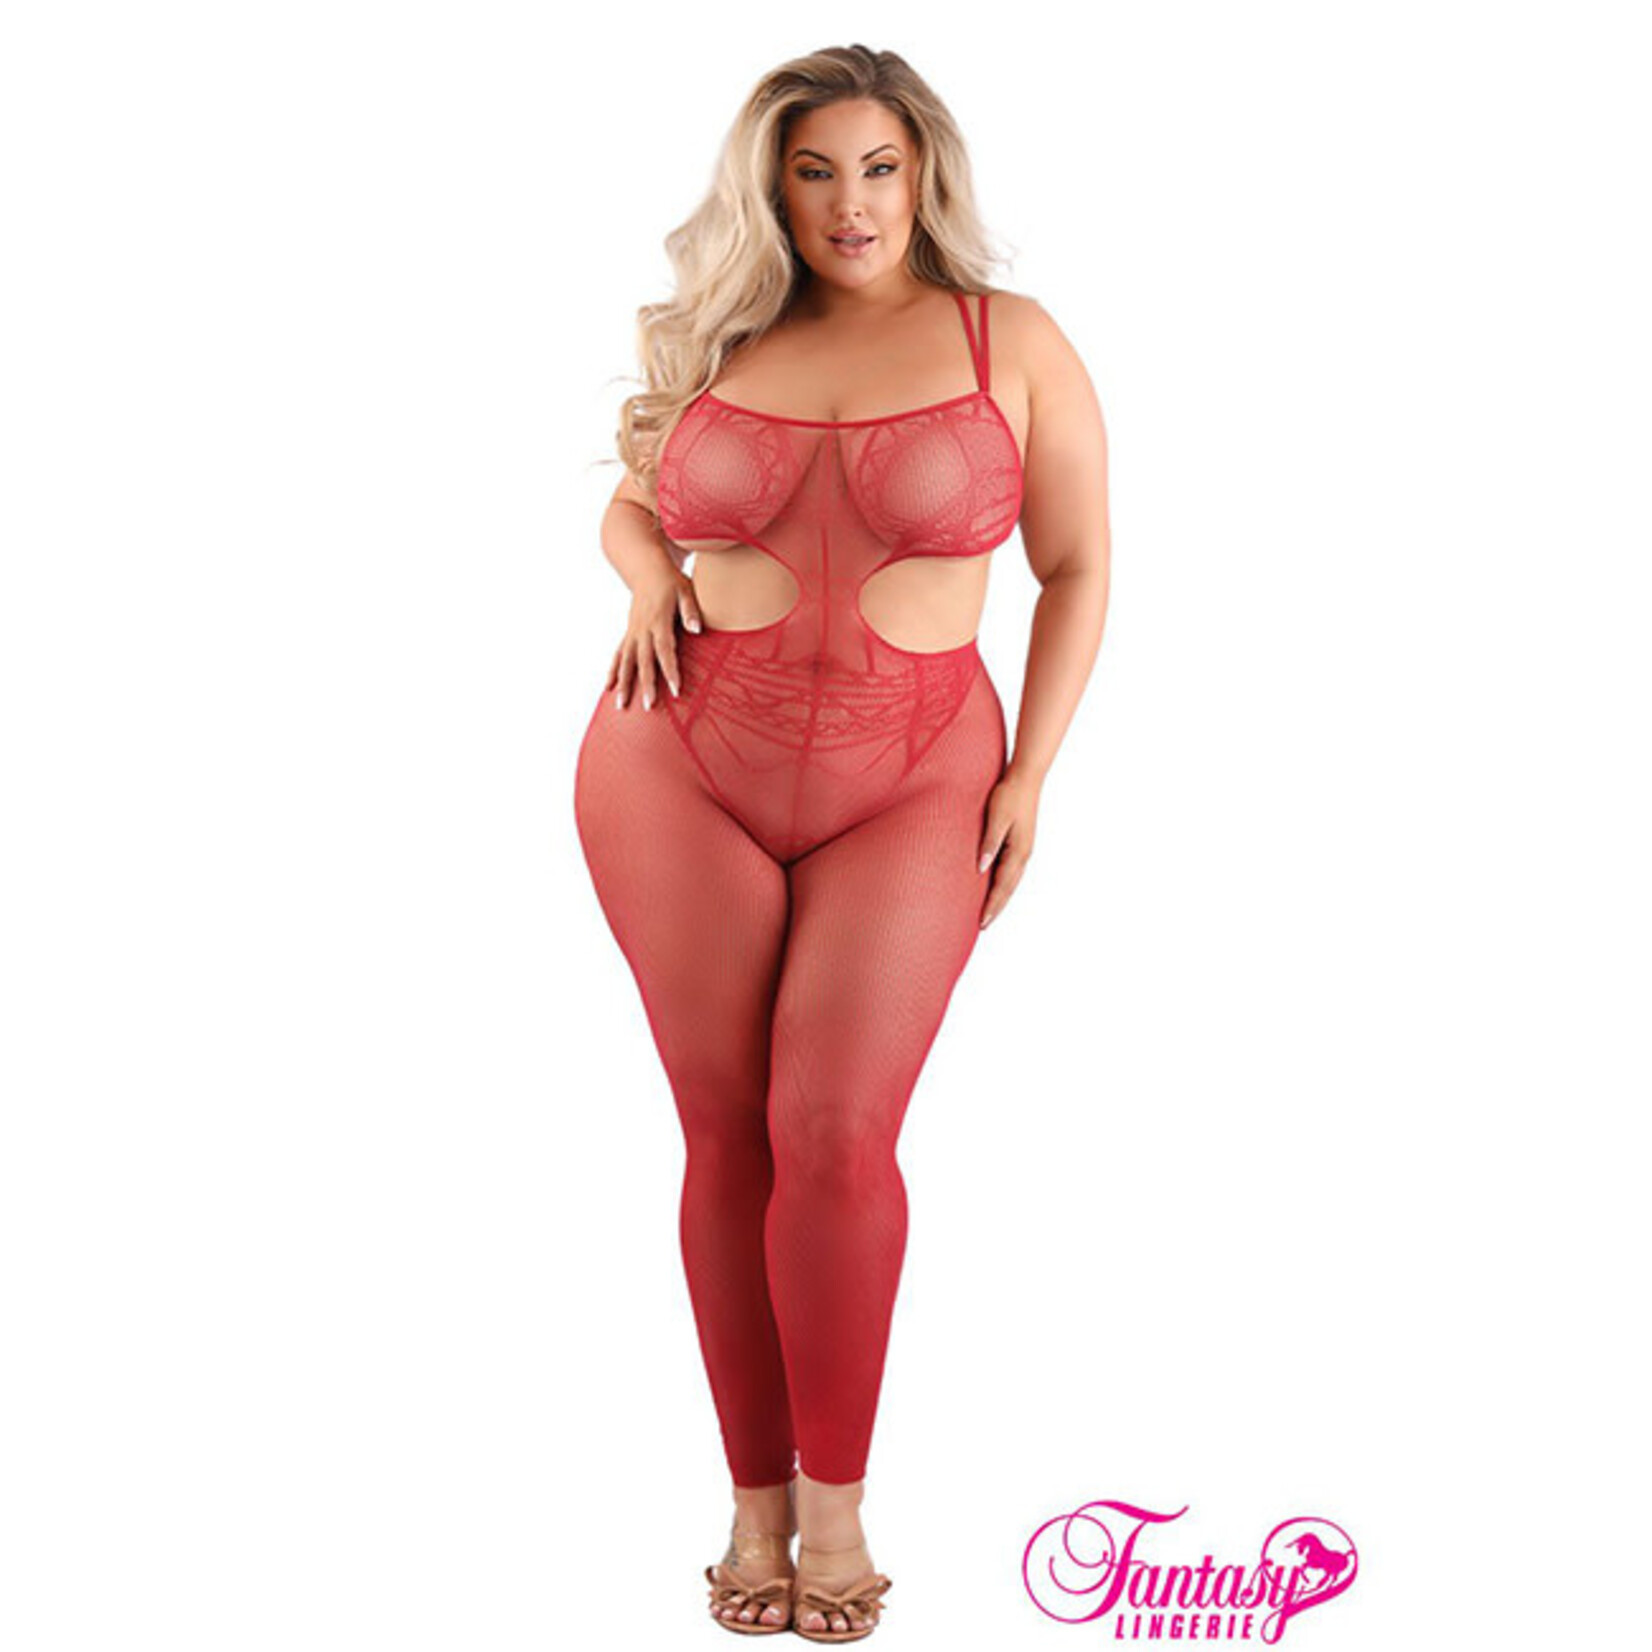 Sheer Fantasy Unforgettable Cut-Out Open Rear Footless Bodystocking